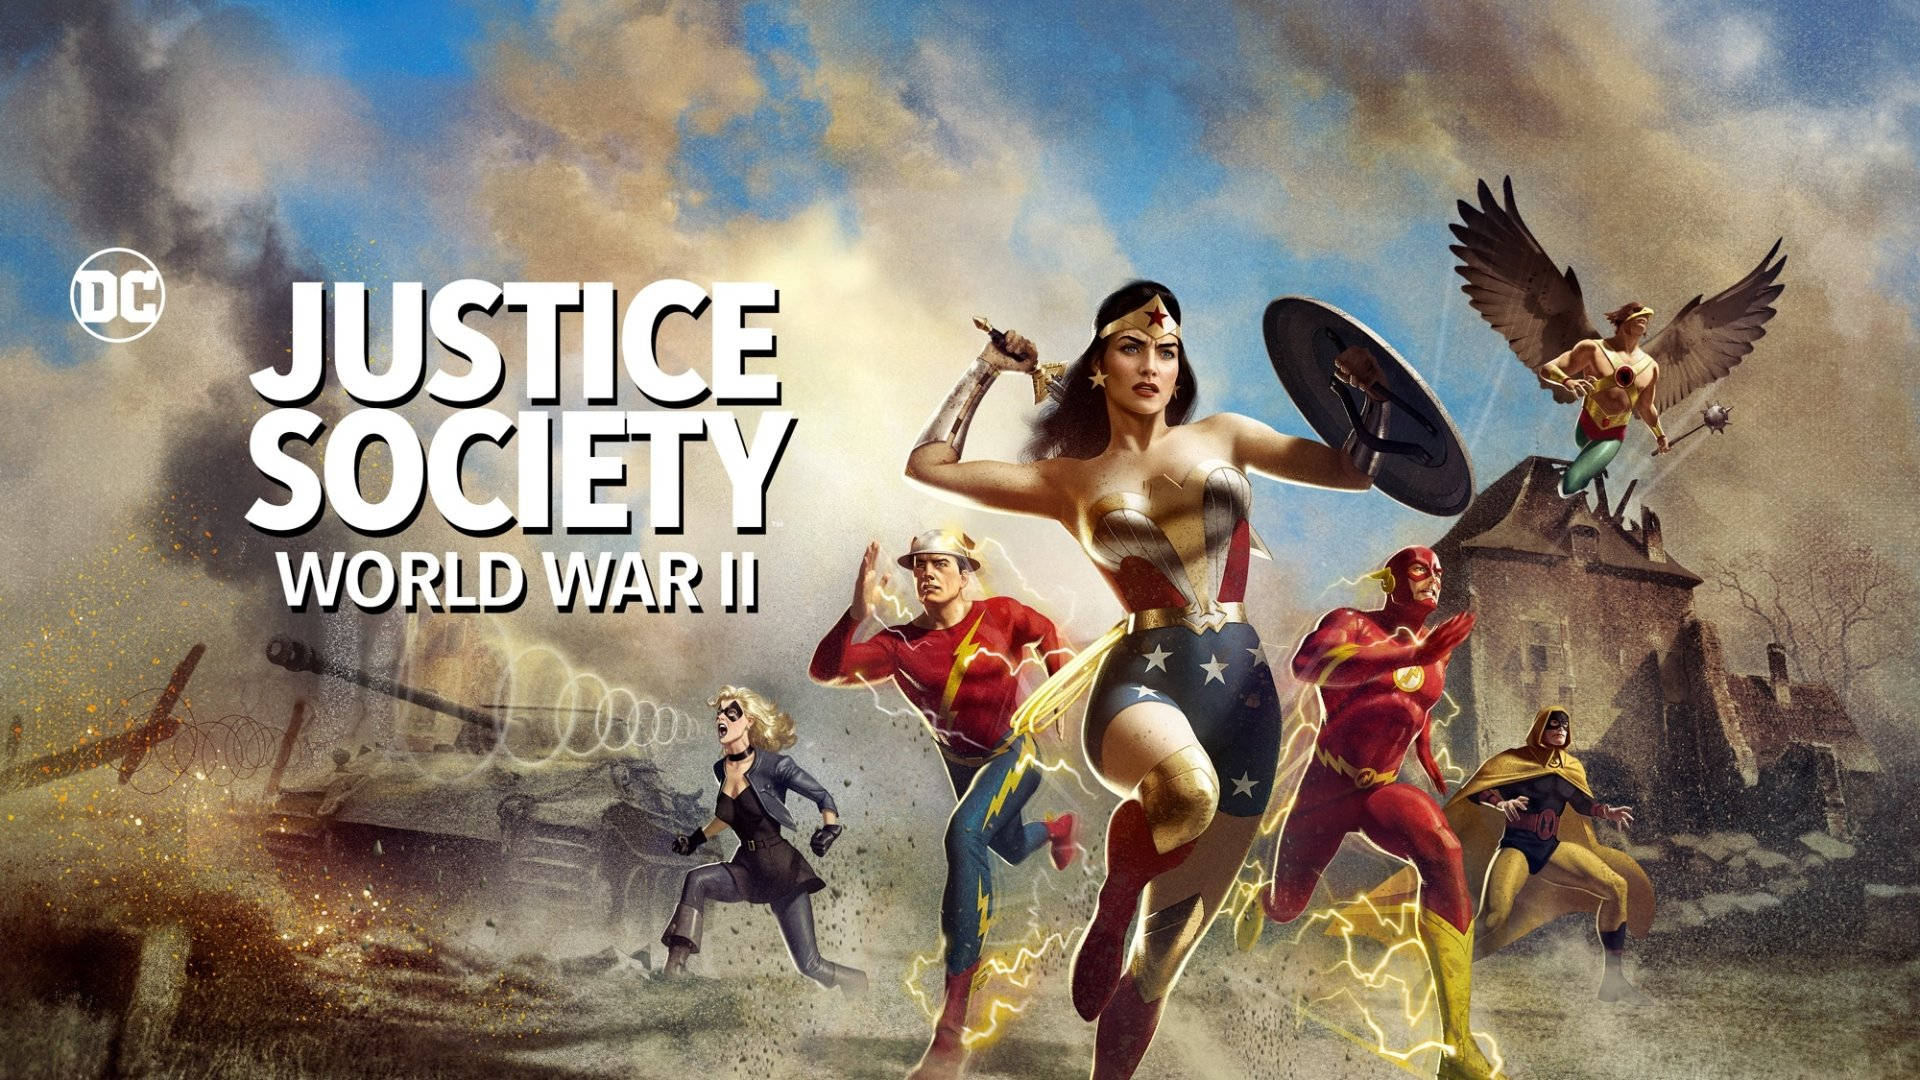 Download Dc Justice Society Of America: World War Ii Wallpaper | Wallpapers .com